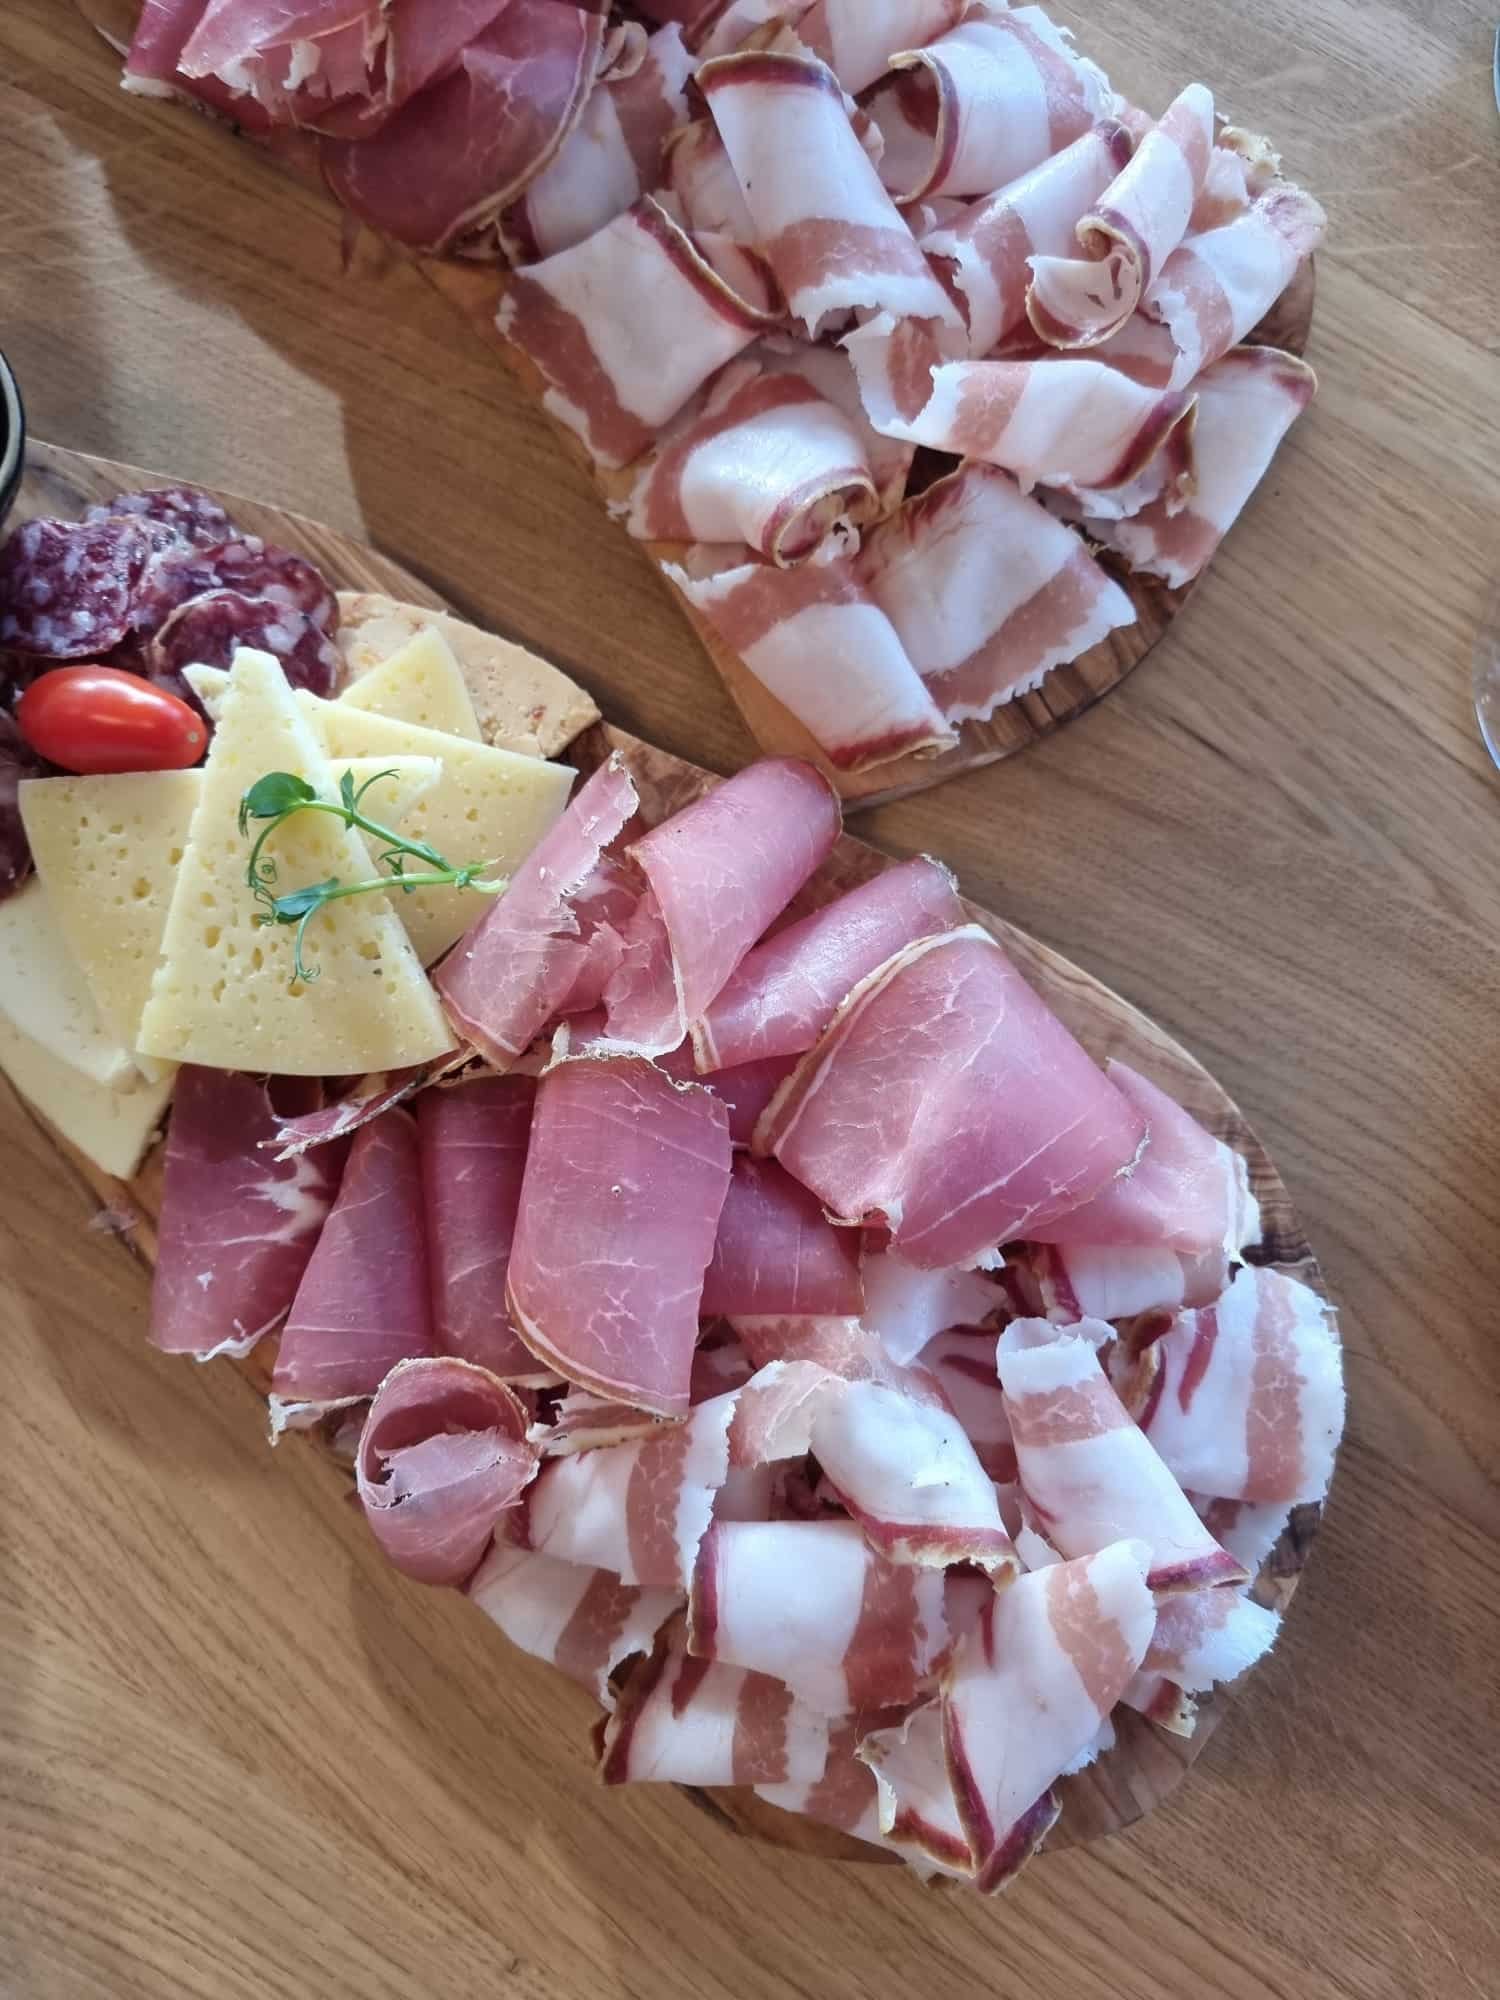 A platter of meat, cheese, and Istrian specialties on a wooden table at Tomaz Winery.